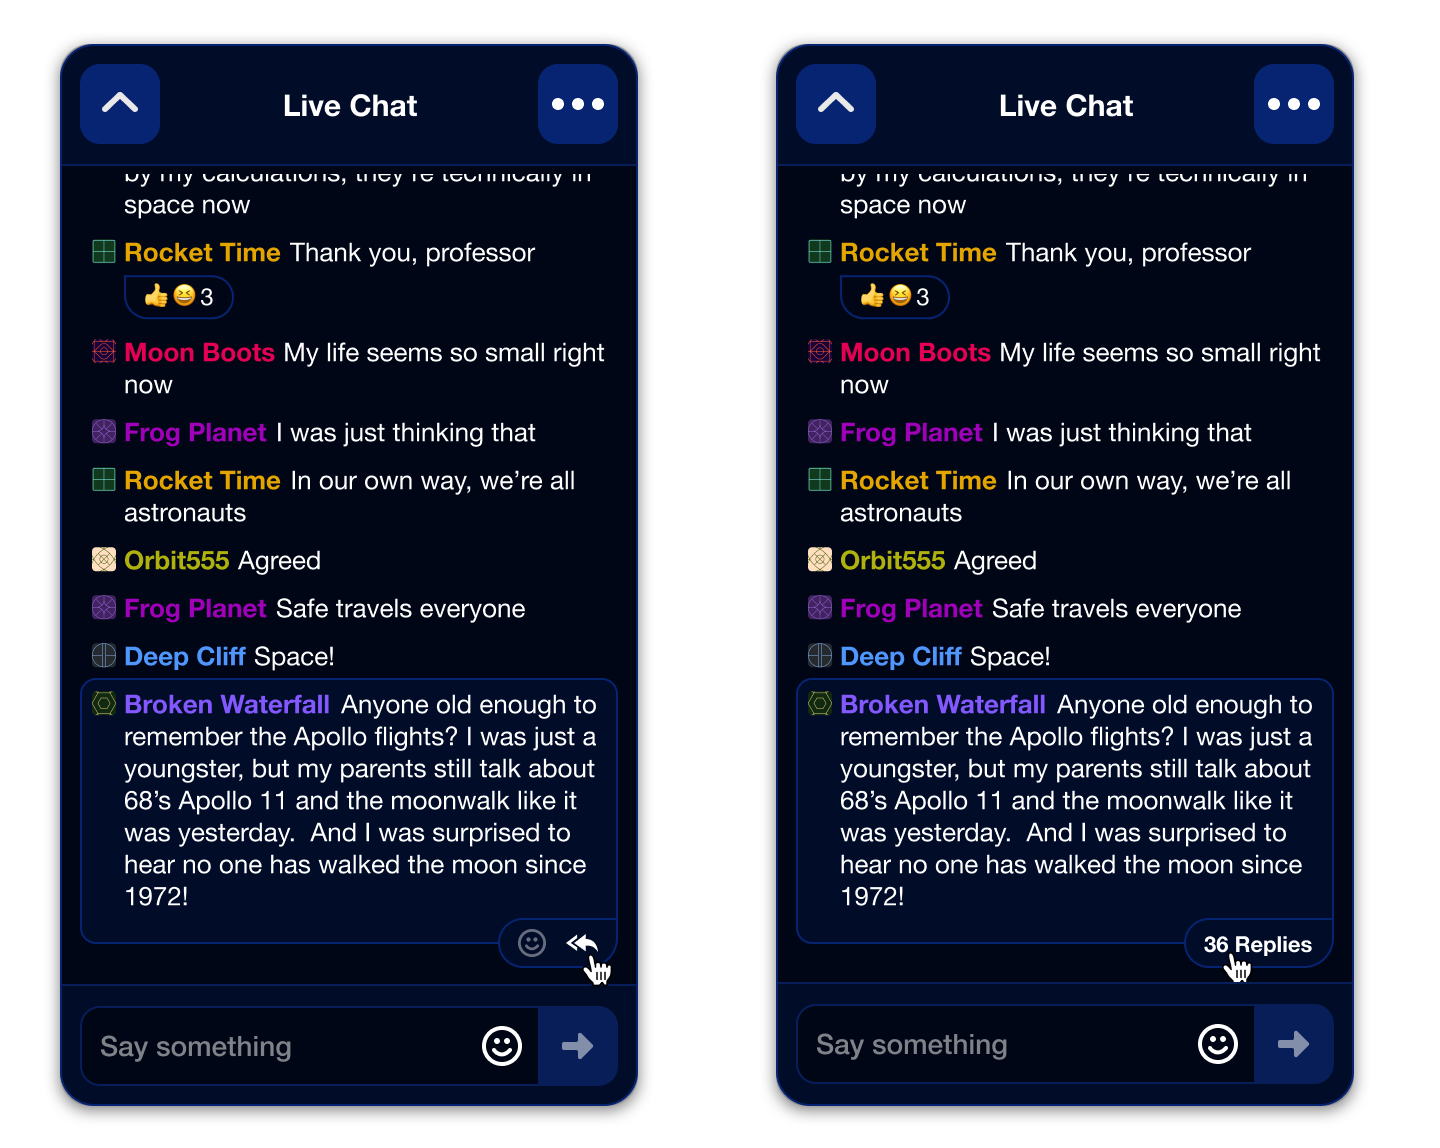 Livestream chats that include well-designed threads help build better experiences